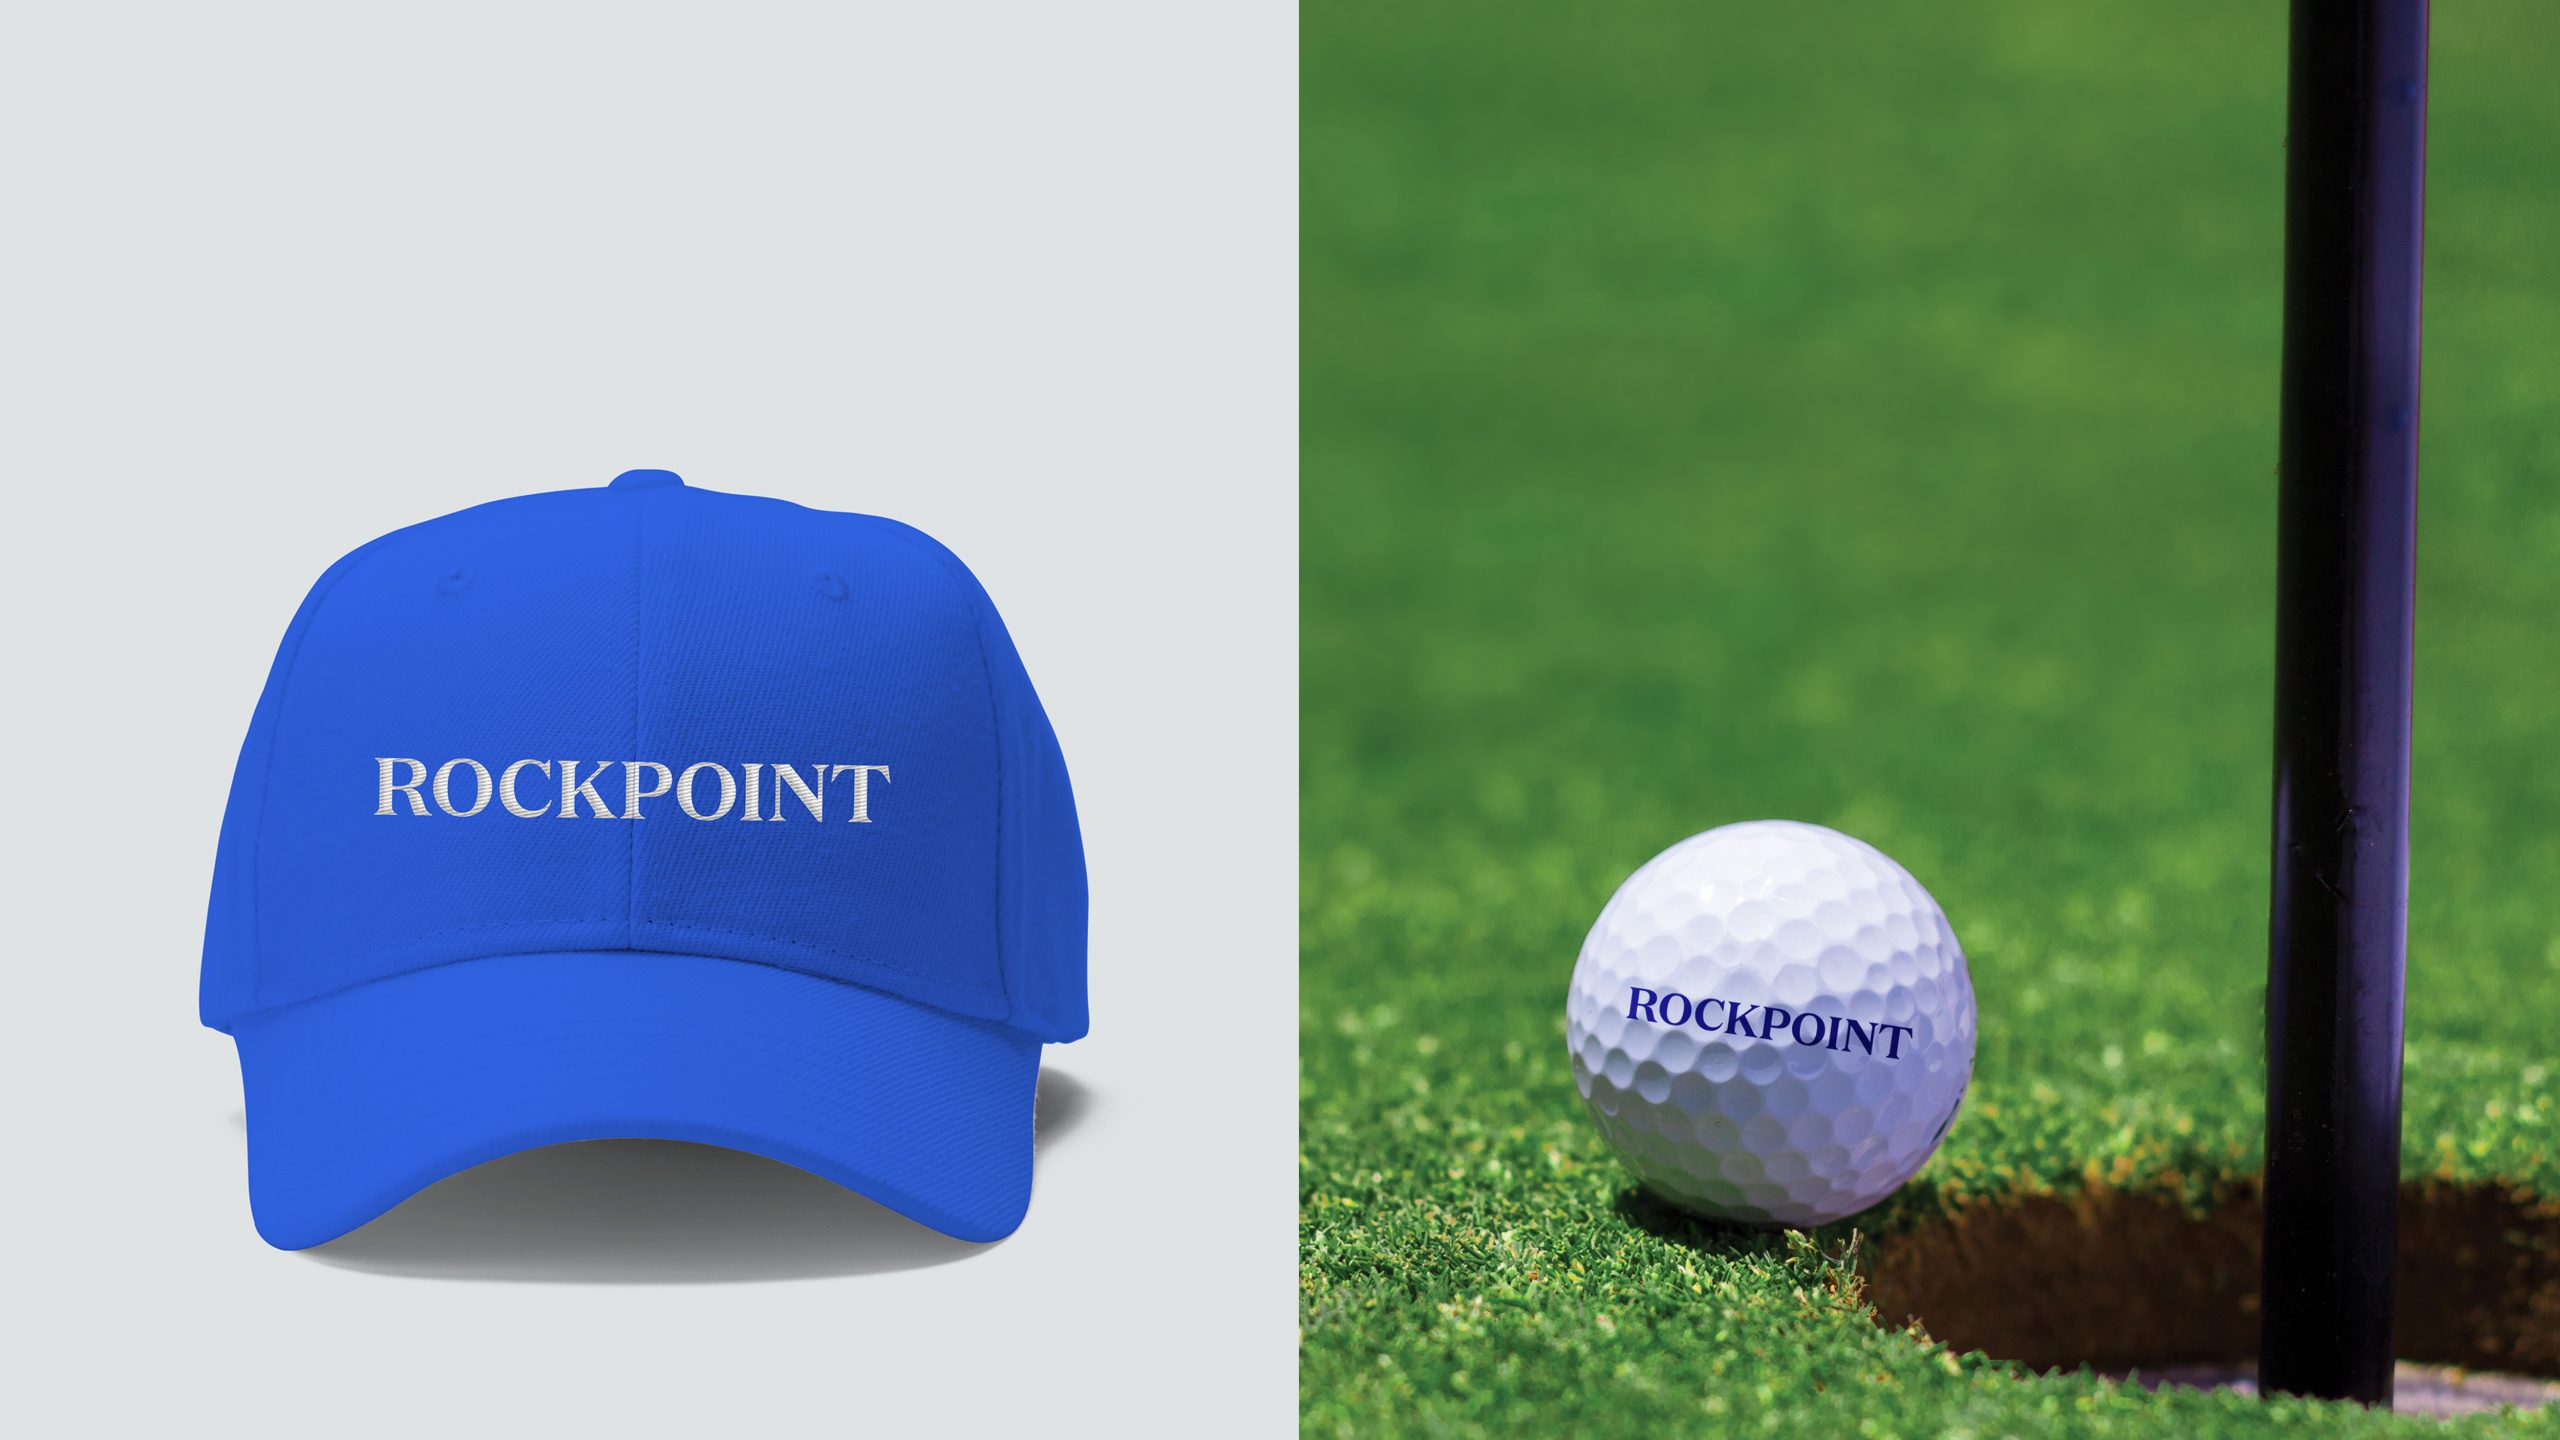 rockpoint-hat-and-ball